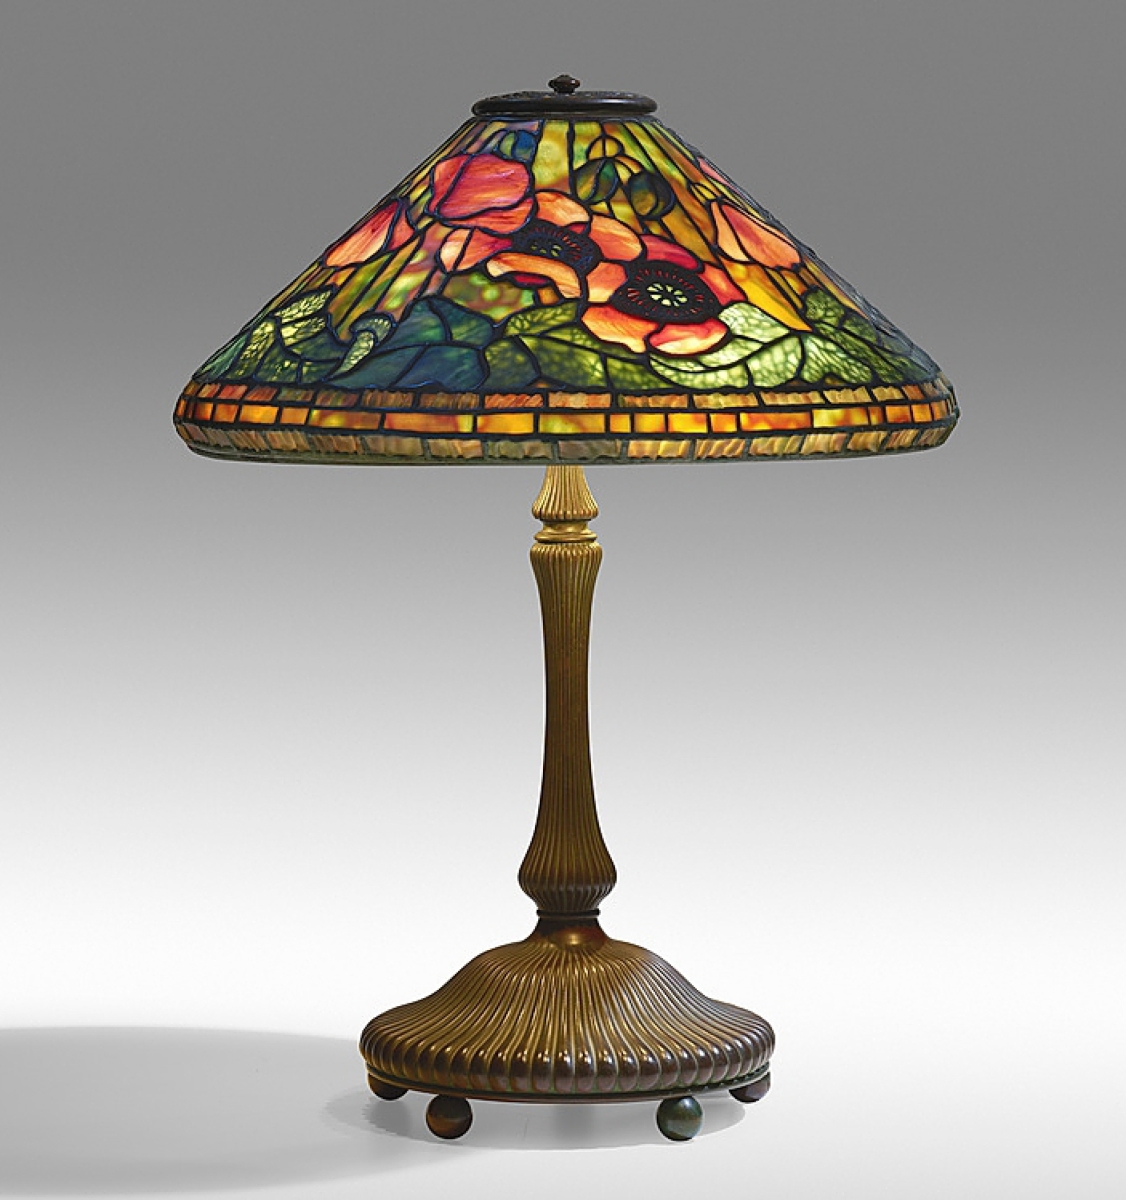 Over doubling estimate was a Tiffany Studios Poppy table lamp that sold for $93,750. The shade sits on a bronze “mushroom” library base.